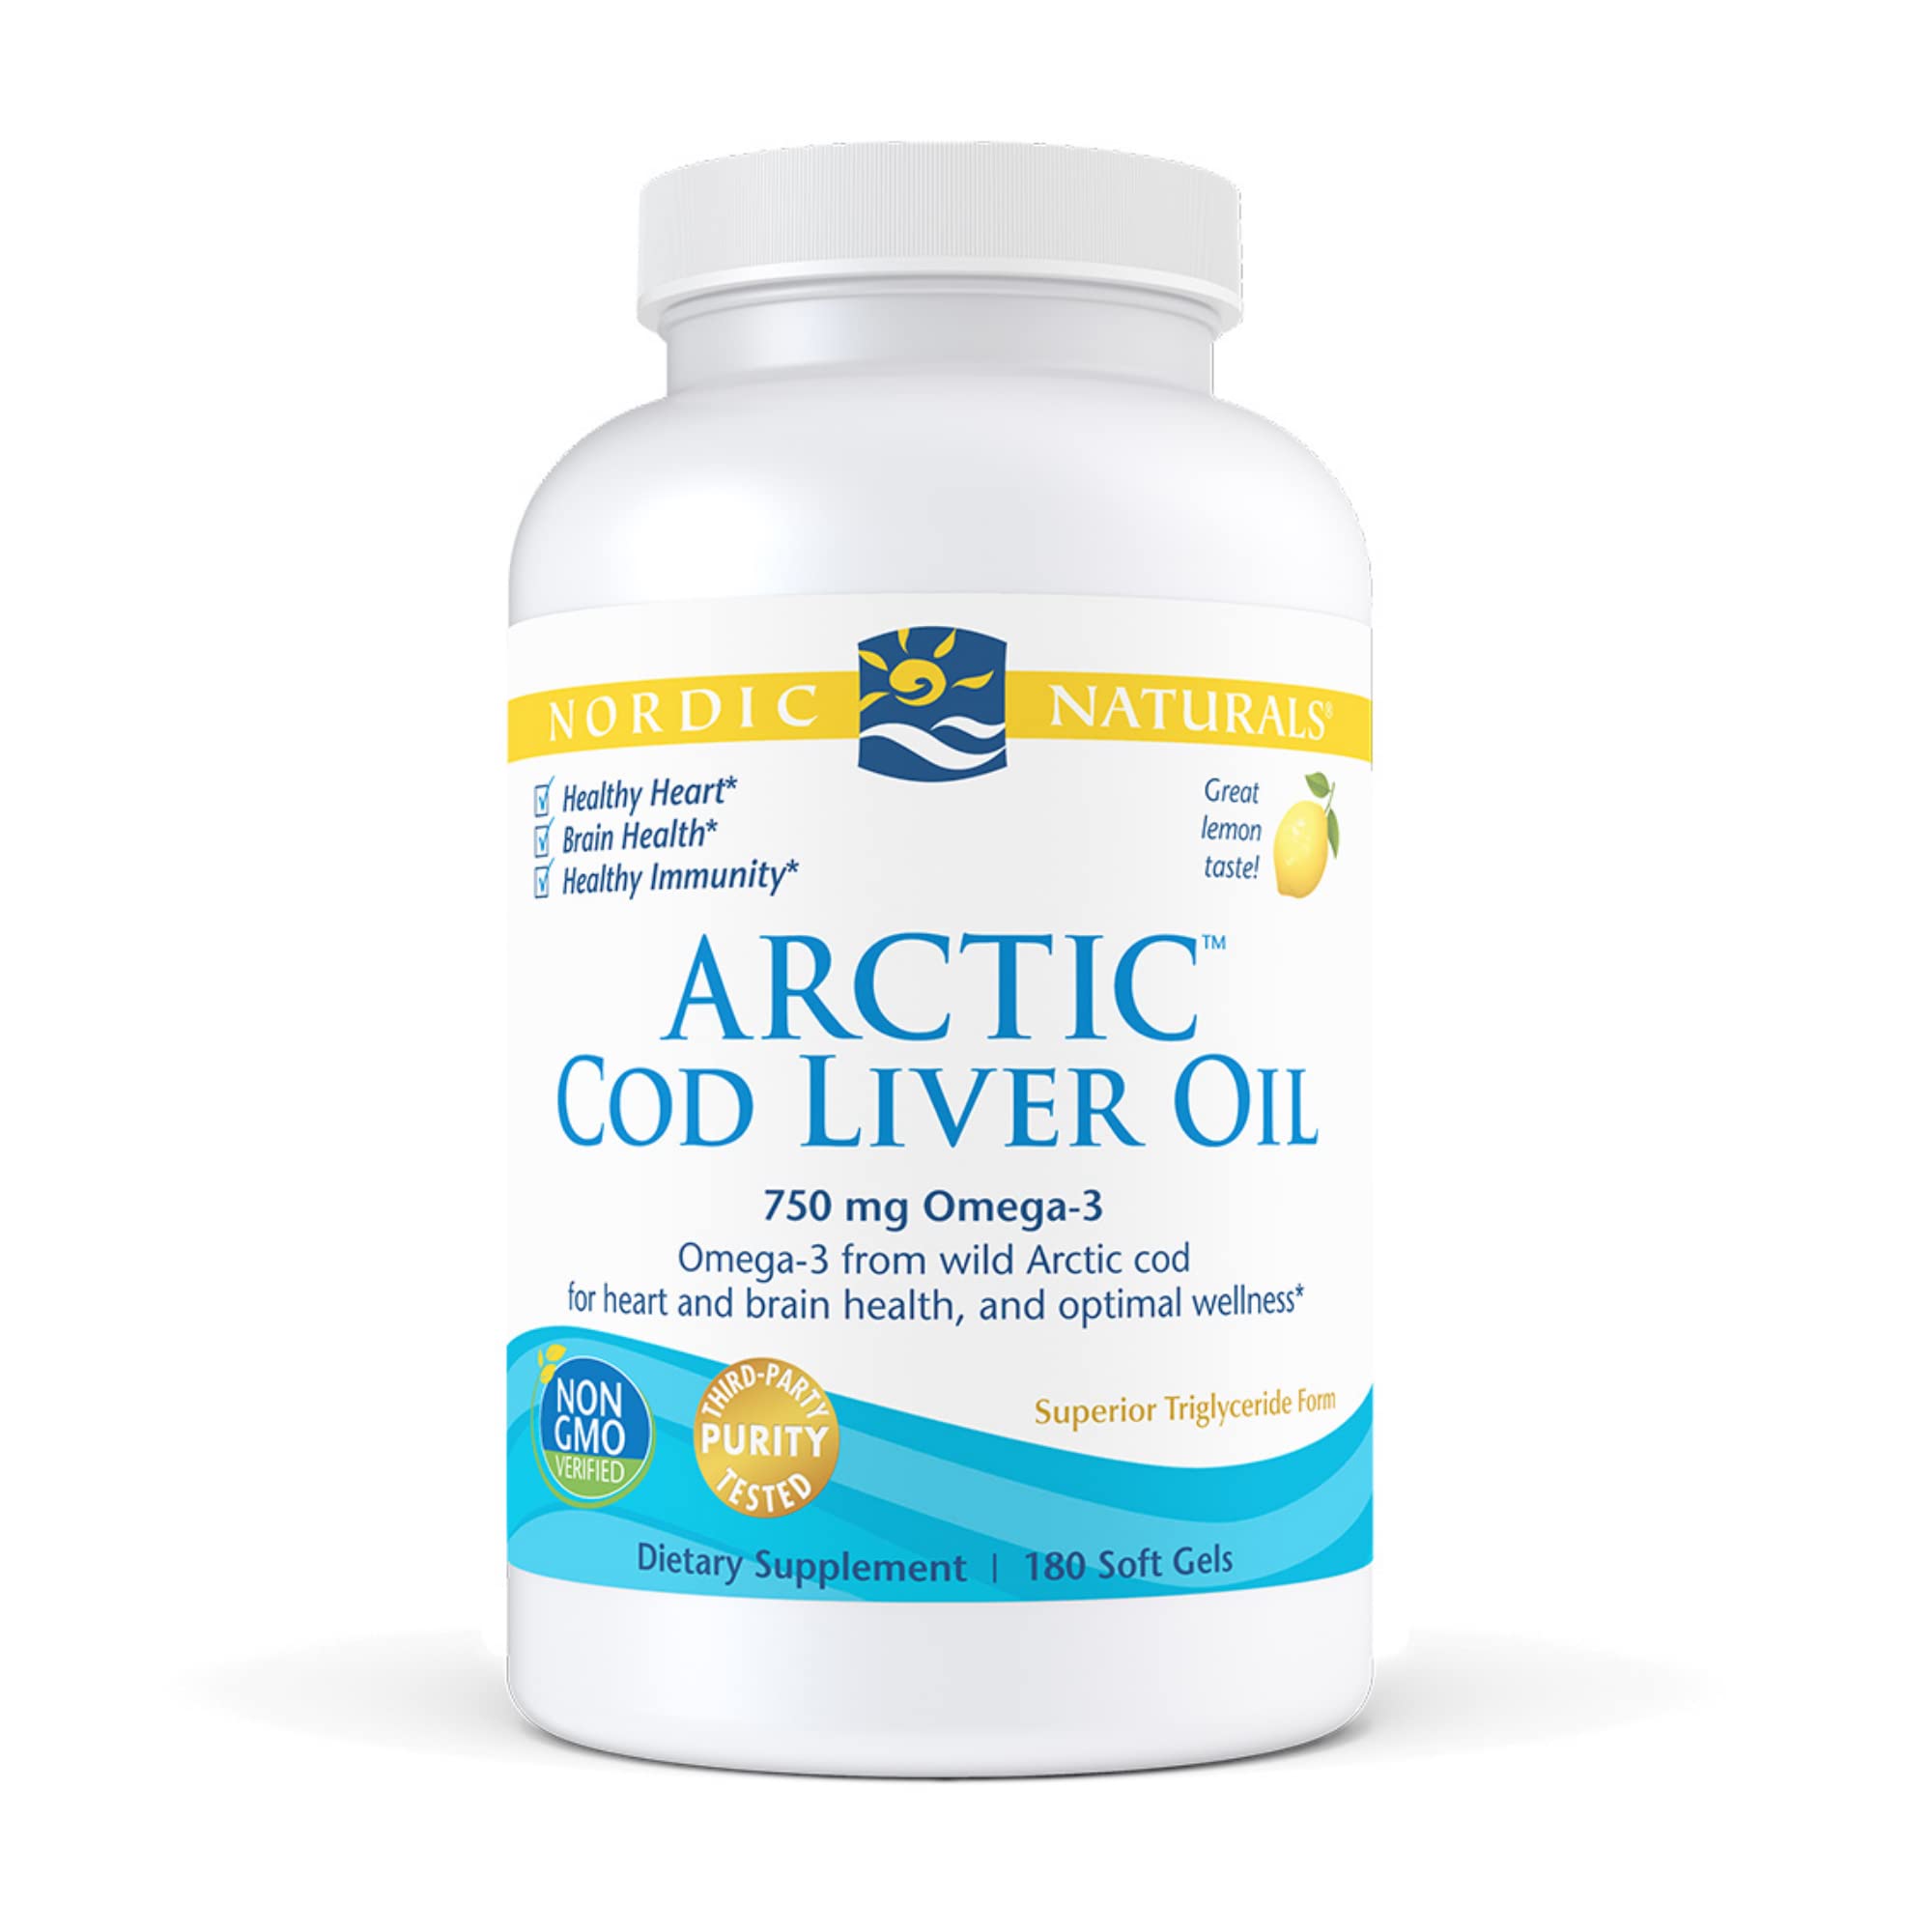 Nordic Naturals - Arctic CLO, Heart and Brain Health, and Optimal Wellness, 180 Soft Gels